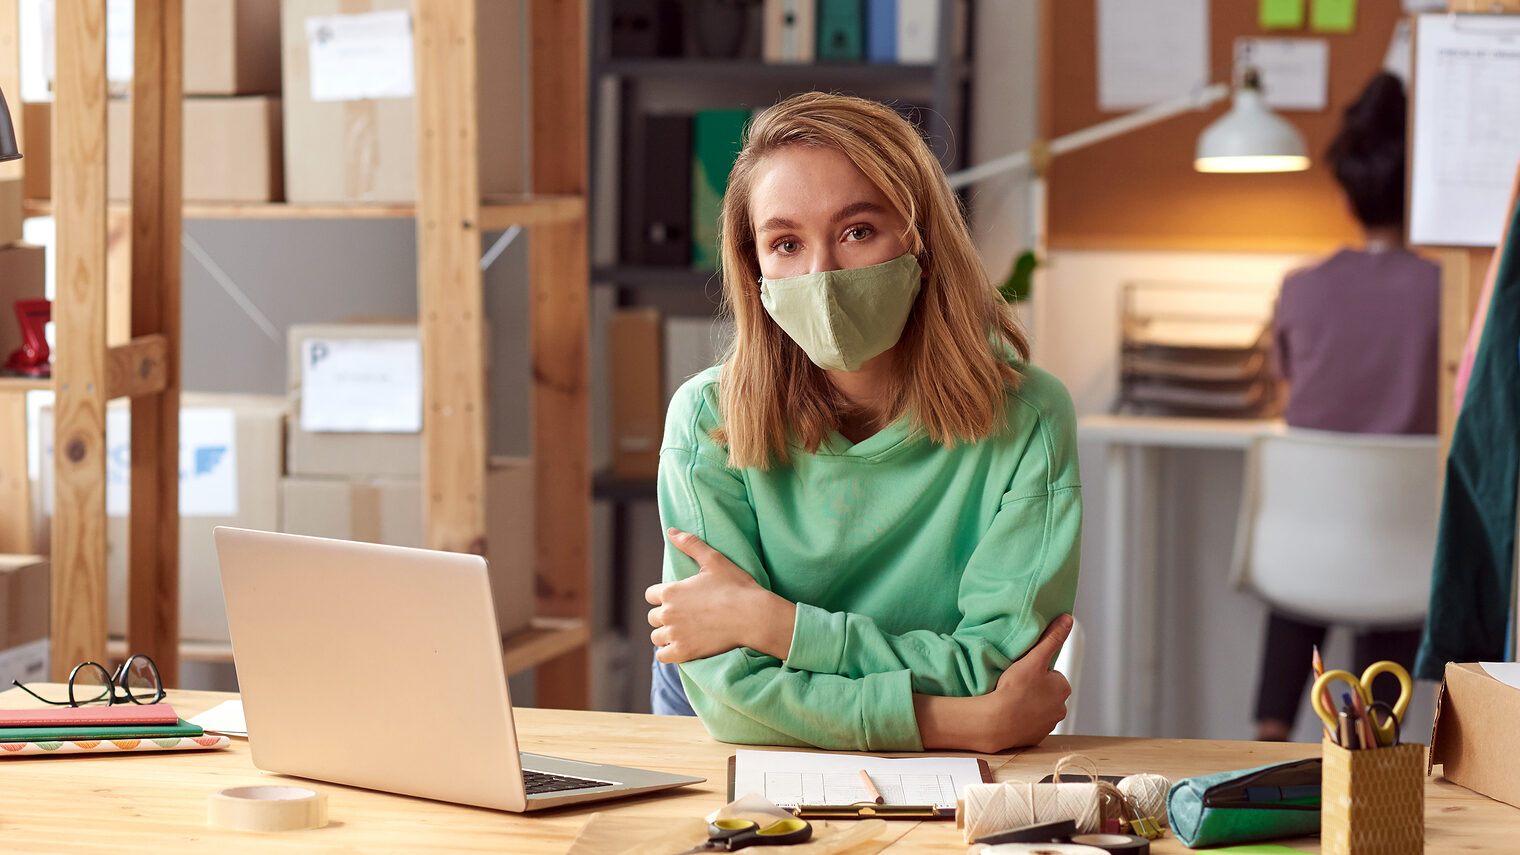 Portrait of young businesswoman in protective mask looking at camera while working at office Schlagwort(e): Adult, Business, Business Person, Businesswoman, Busy, Casual Clothing, Caucasian Ethnicity, Clothing, Computer, Confidence, Craft, Creativity, Design, Design Professional, Desk, Expertise, Fashion, Indoors, Industry, Internet, Laptop, Looking, Modern, New Business, Occupation, Office, People, Place of Work, Professional Occupation, Small Business, Technology, Textile Industry, Wireless Technology, Women, Working, Workshop, Tailor, Designer, Design Occupation, Protective Mask, Pandemic, Epidemic, adult, business, business person, businesswoman, busy, casual clothing, caucasian ethnicity, clothing, computer, confidence, craft, creativity, design, design professional, desk, expertise, fashion, indoors, industry, internet, laptop, looking, modern, new business, occupation, office, people, place of work, professional occupation, small business, technology, textile industry, wireless technology, women, working, workshop, tailor, designer, design occupation, protective mask, pandemic, epidemic